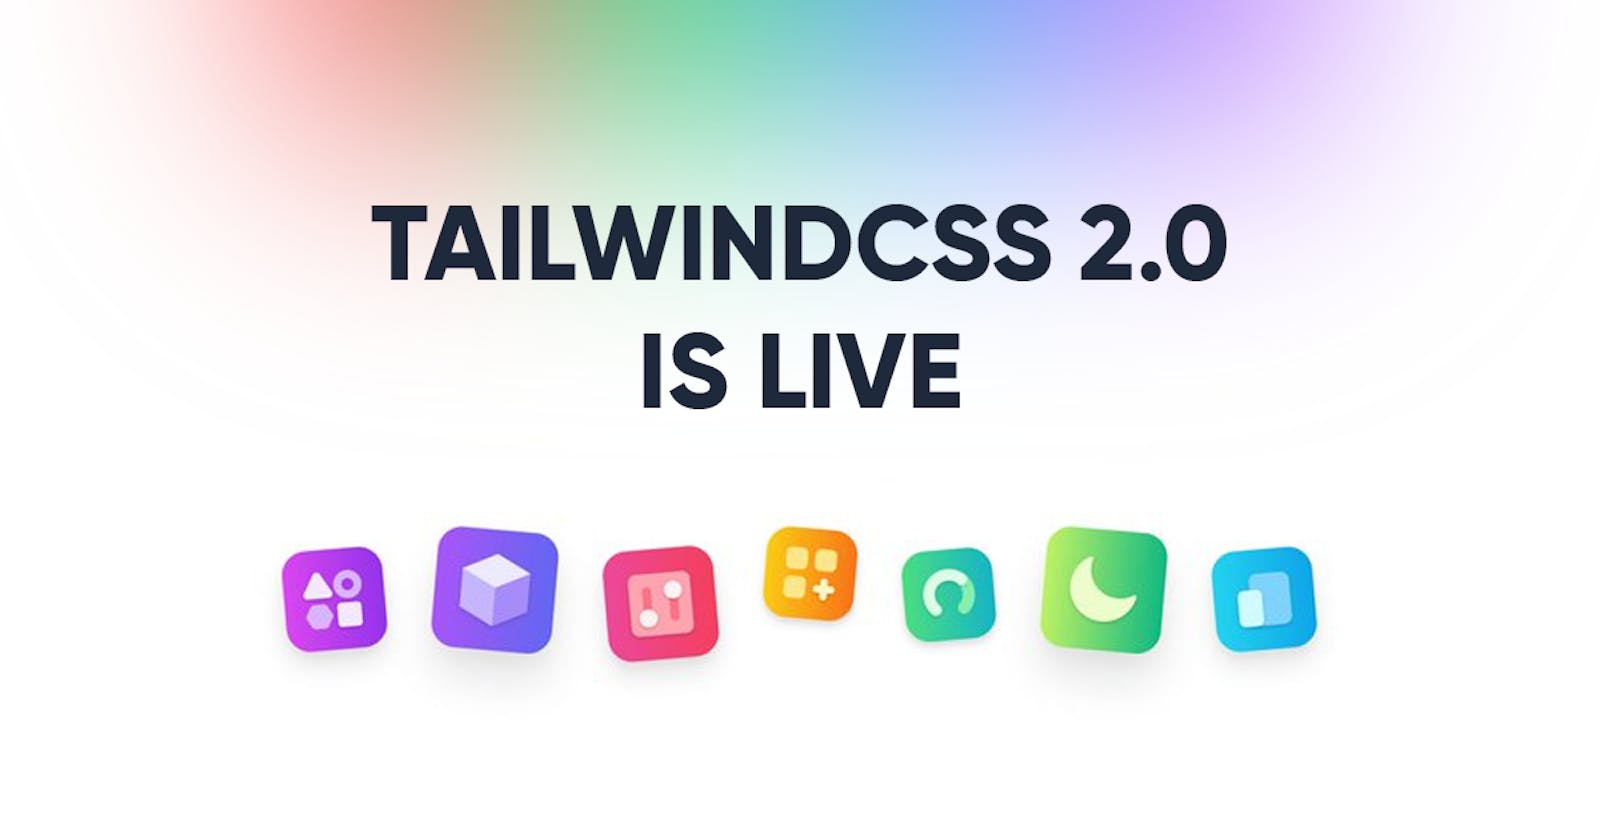 Tailwind 2.0 is Live!